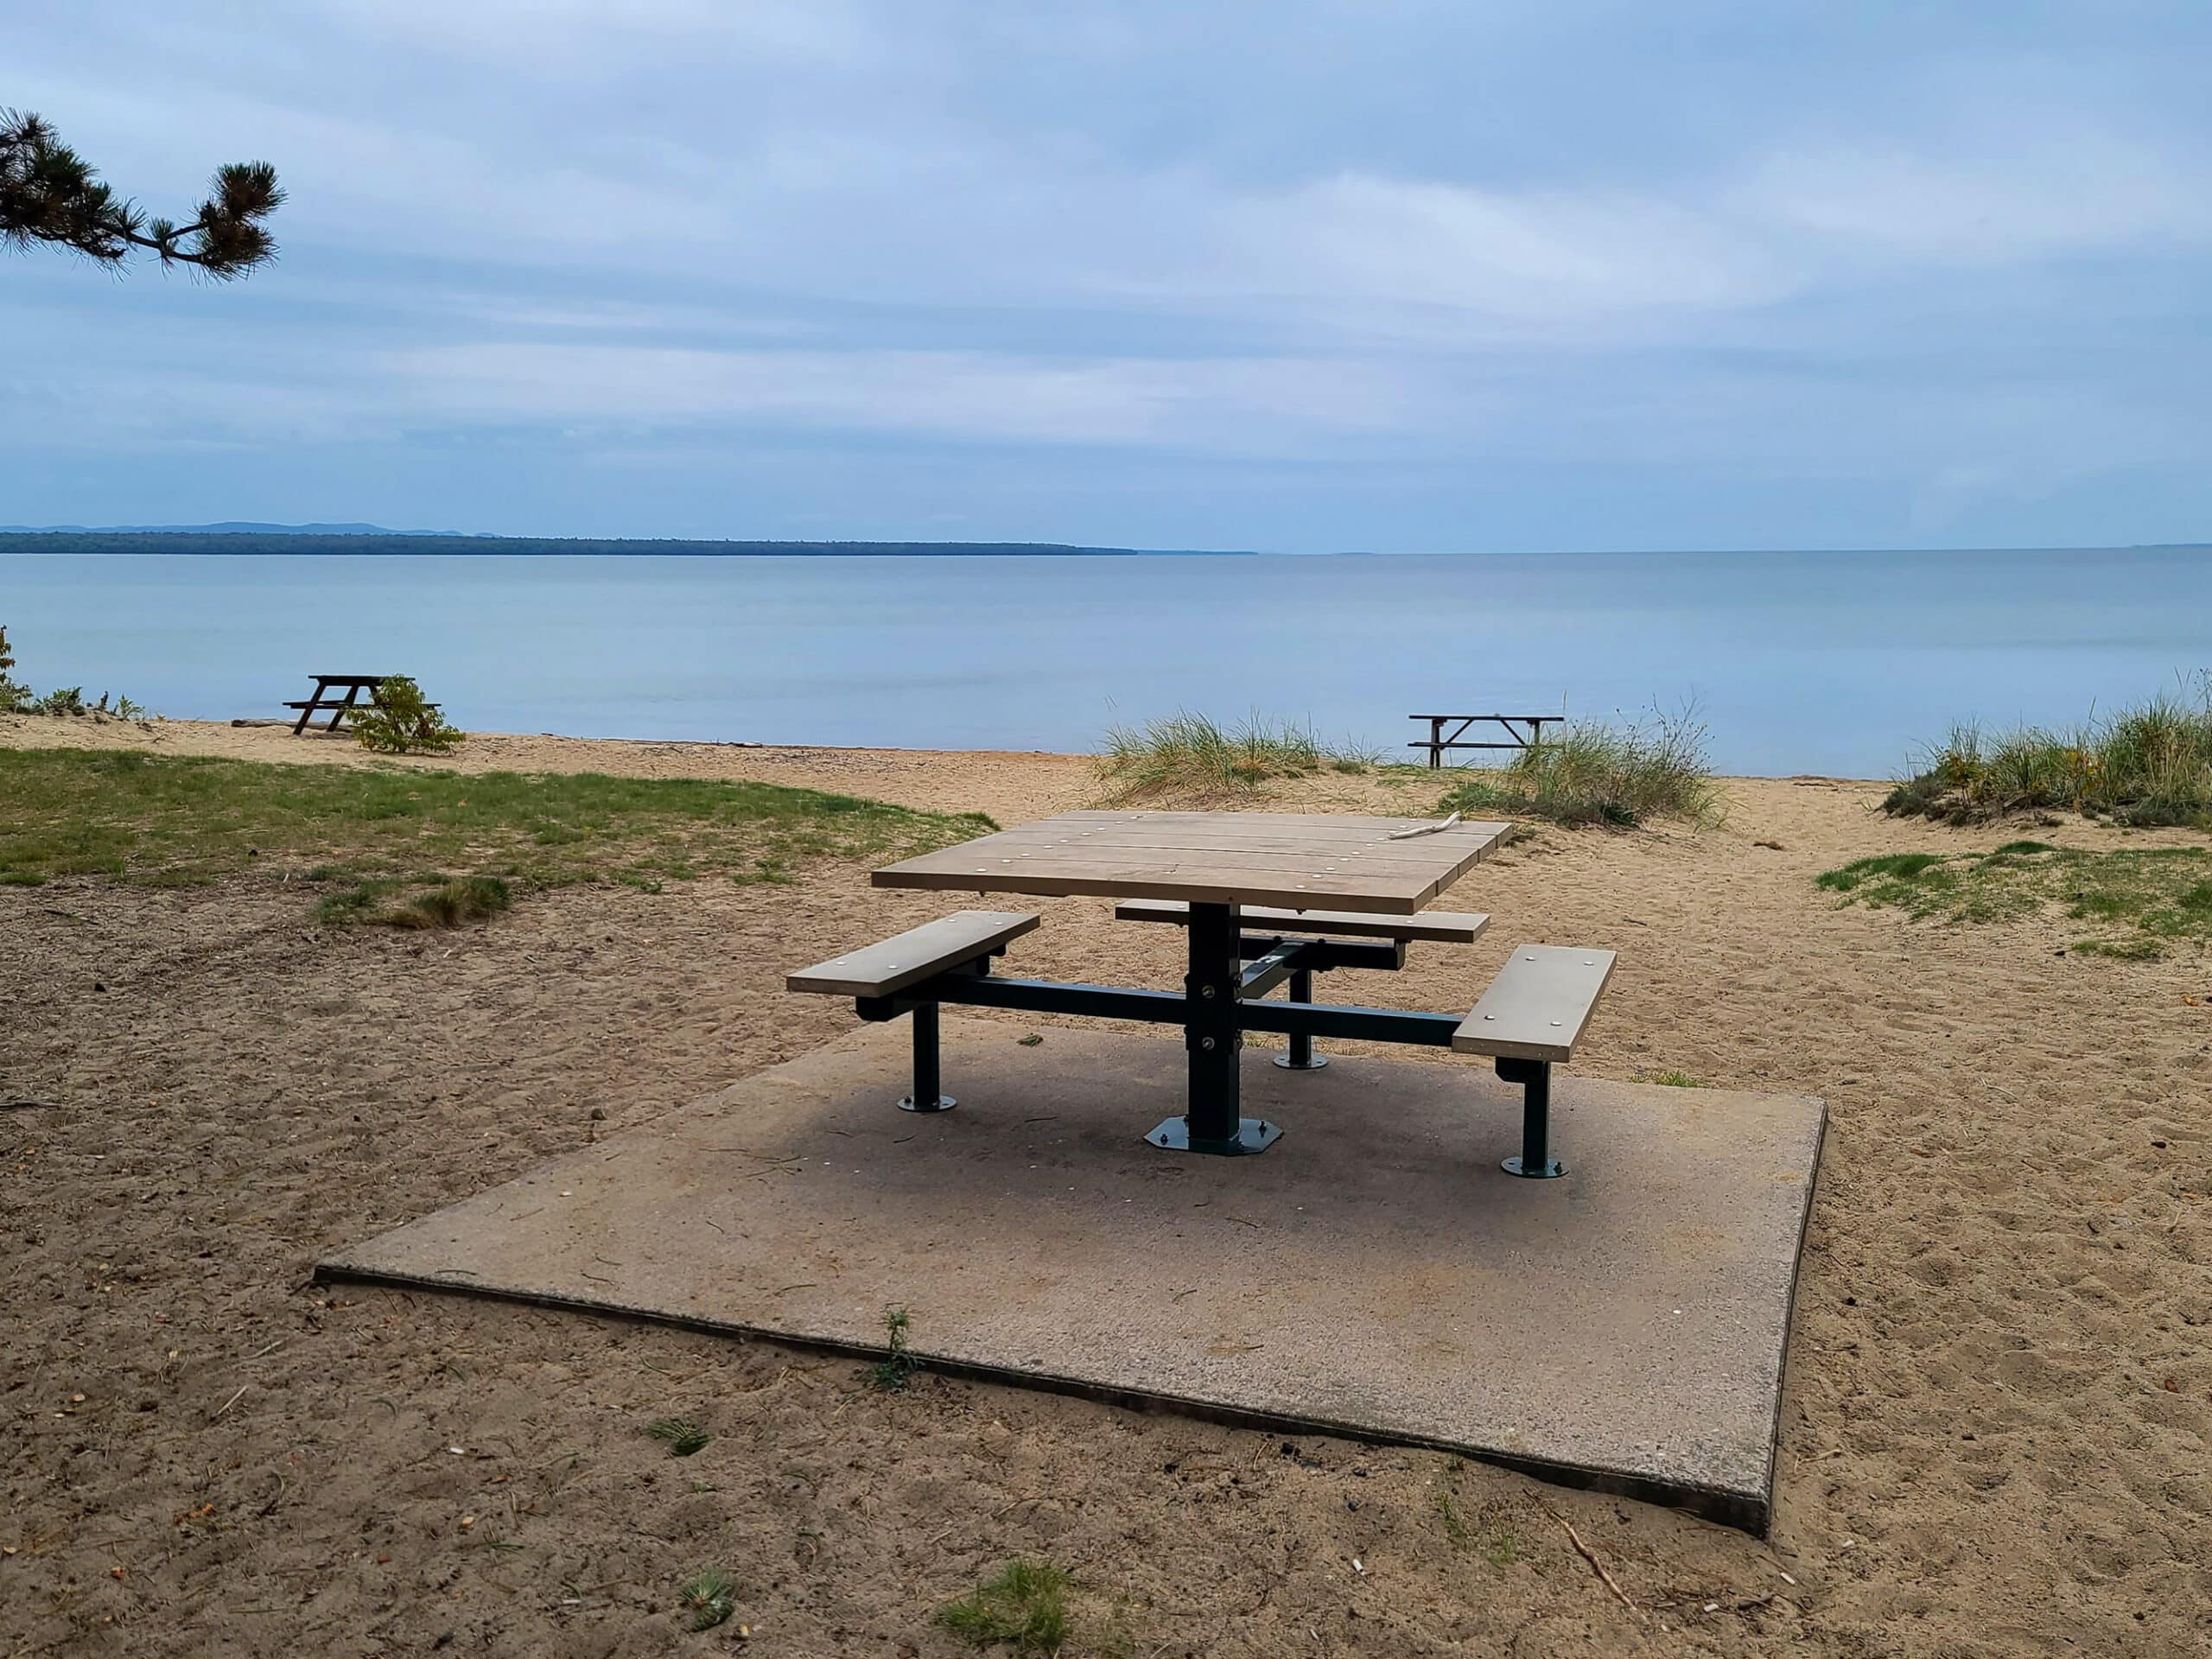 An accessible picnic table and platform.  It's on a beach, with no concrete pathway leading over the sand to get to it.